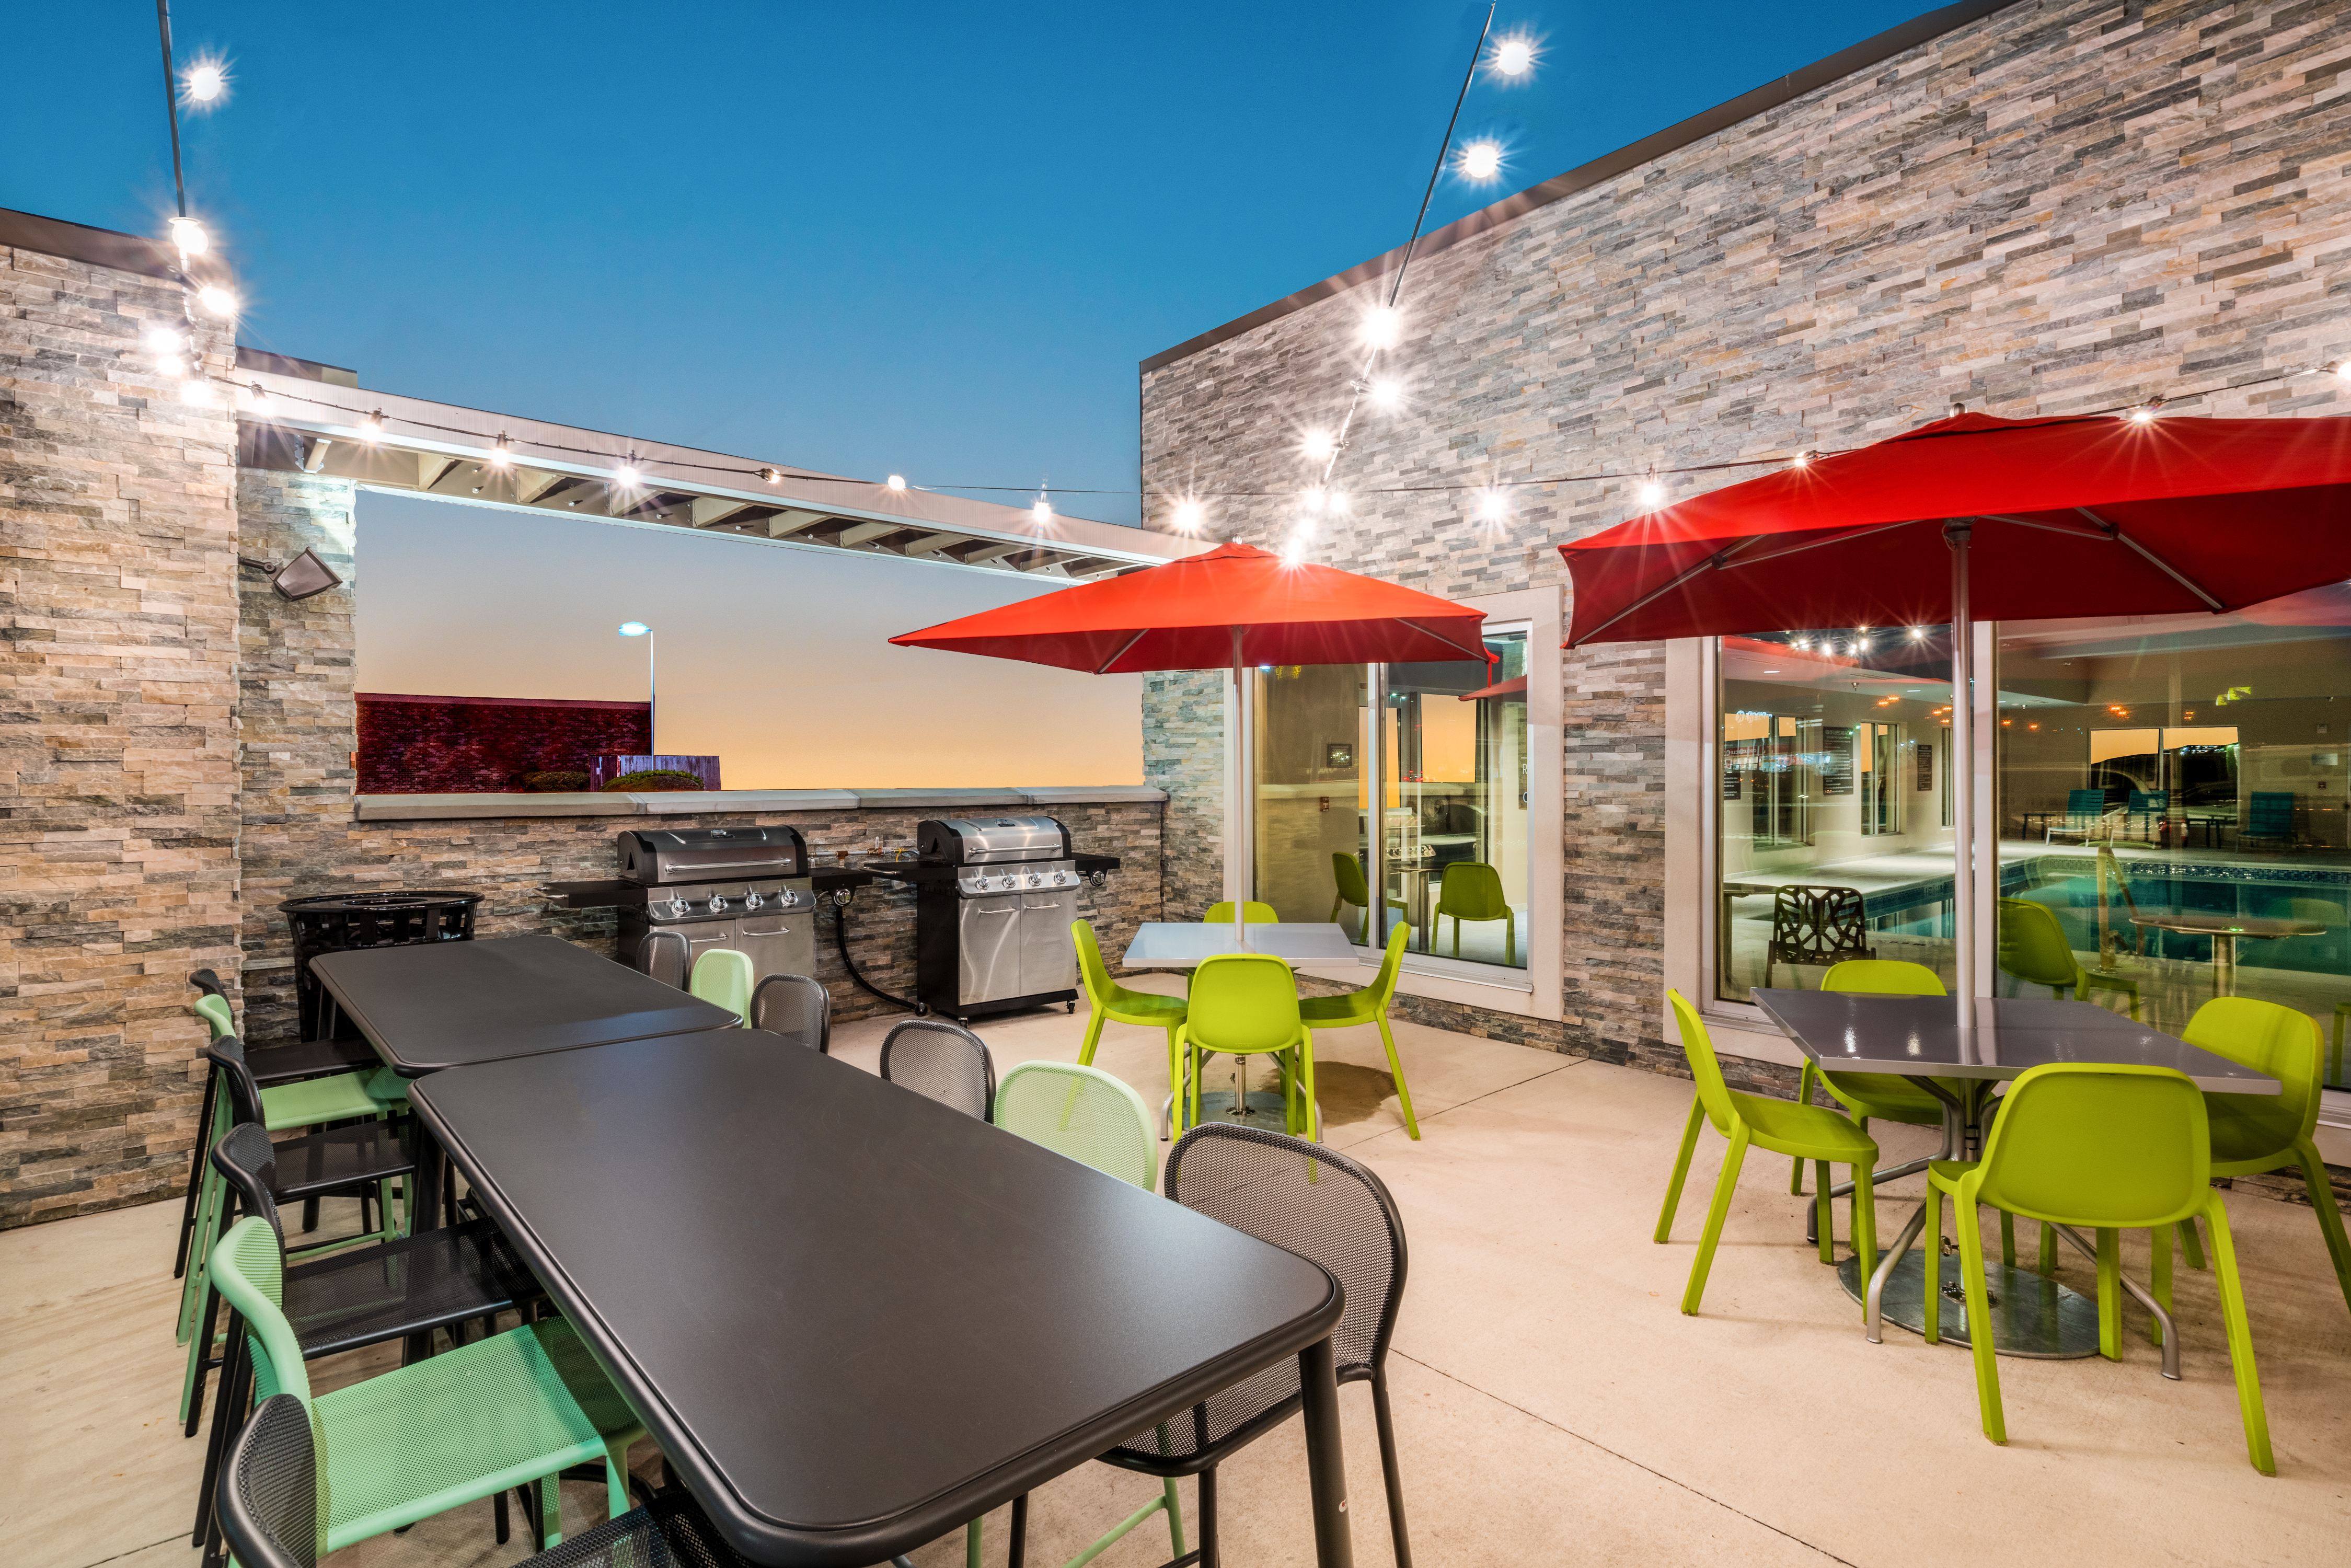 Home2 Suites Brunswick Outdoor Grill